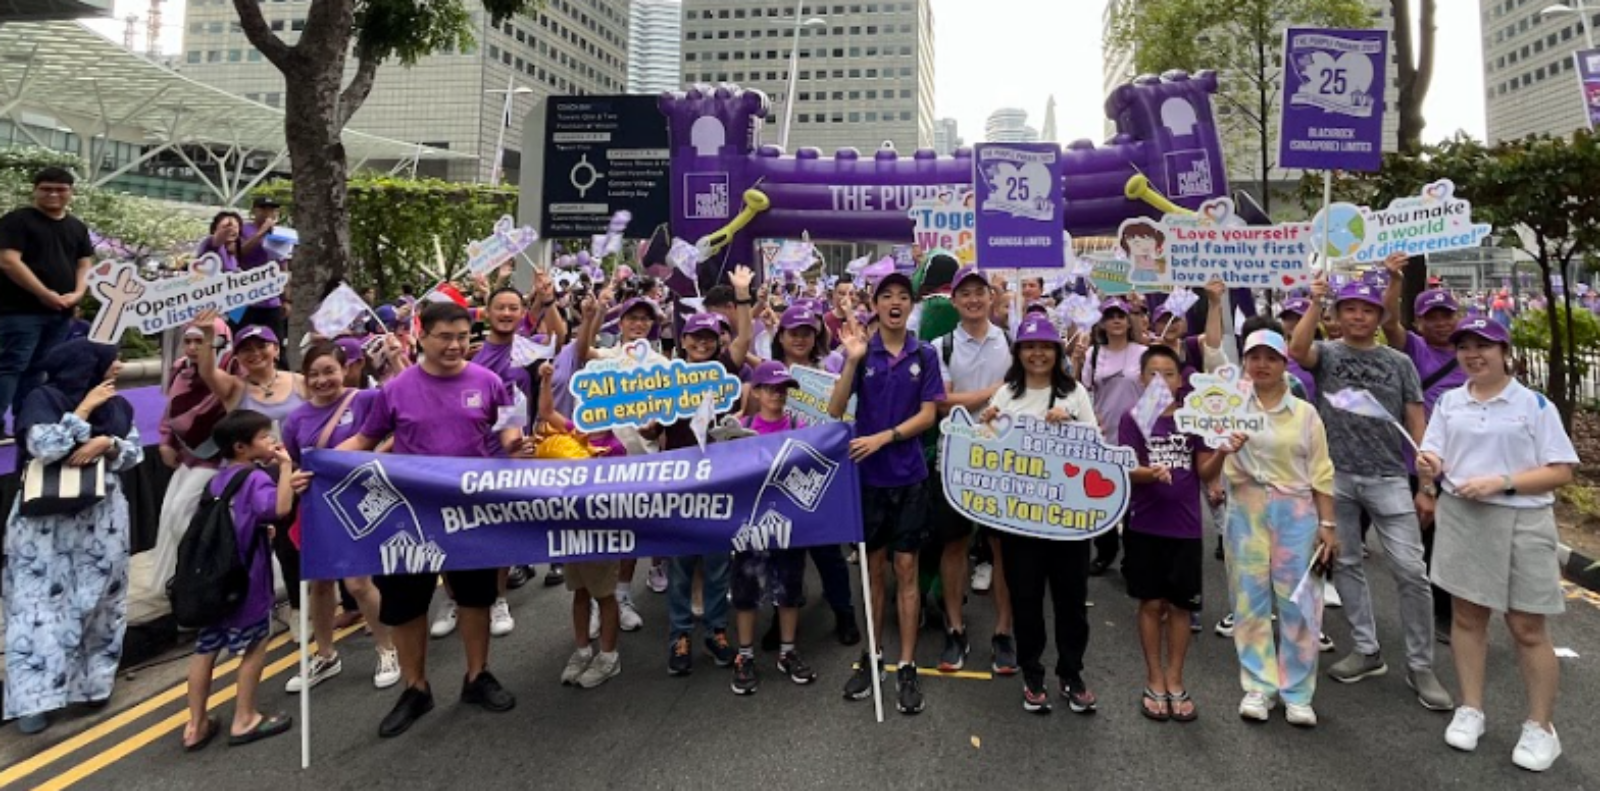 The Purple Parade 2023: A Spectacular Showcase of Care and Inclusivity